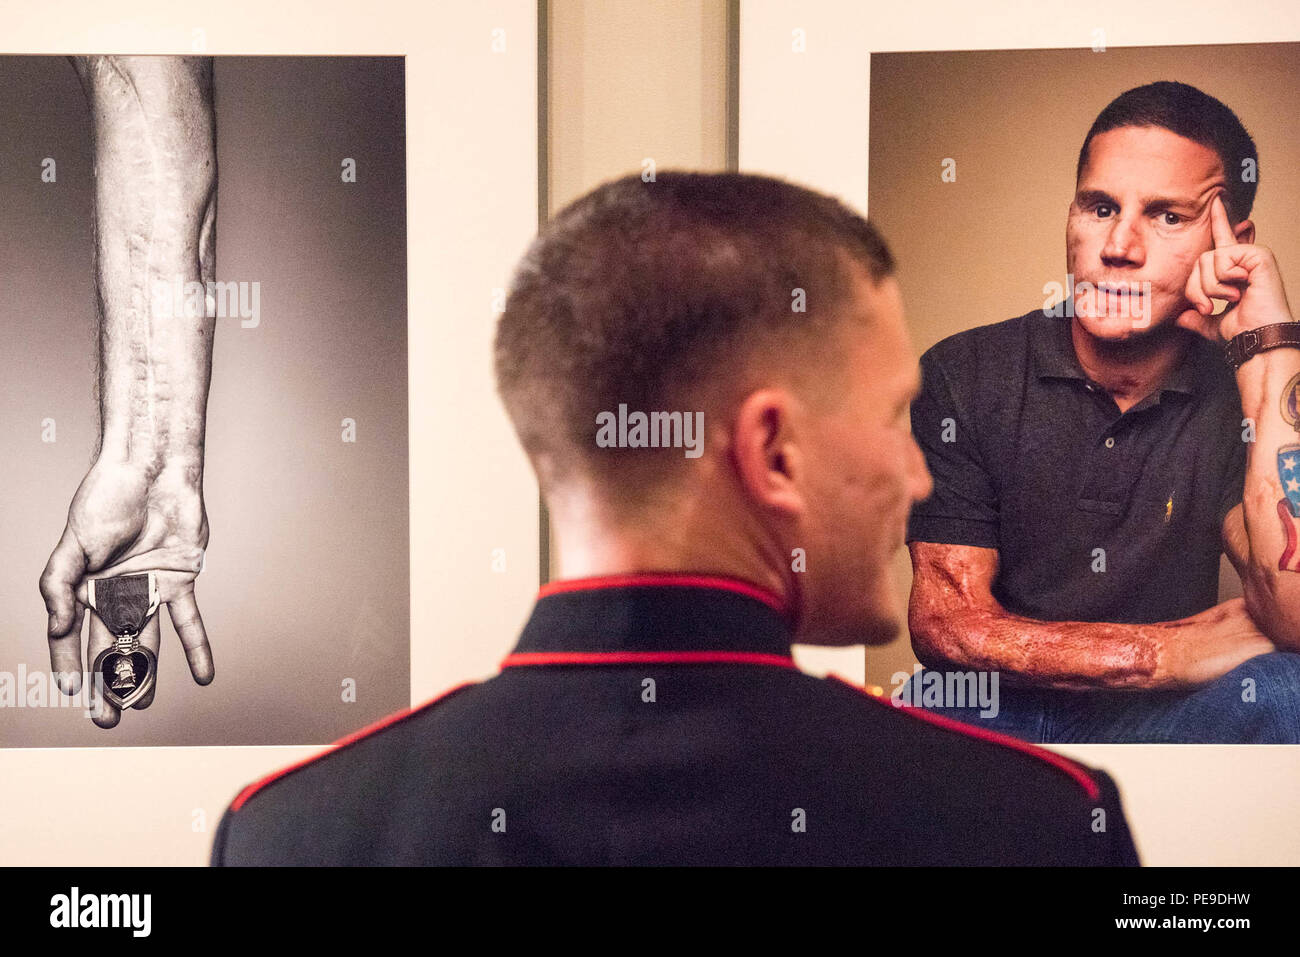 U.S. Marine Cpl. Kyle Carpenter observes his portrait at the National Portrait Gallery in Washington, D.C., Nov. 15, 2015. Carpenter is the youngest living Medal of Honor recipient. (DoD photo by D. Myles Cullen/Released) Stock Photo